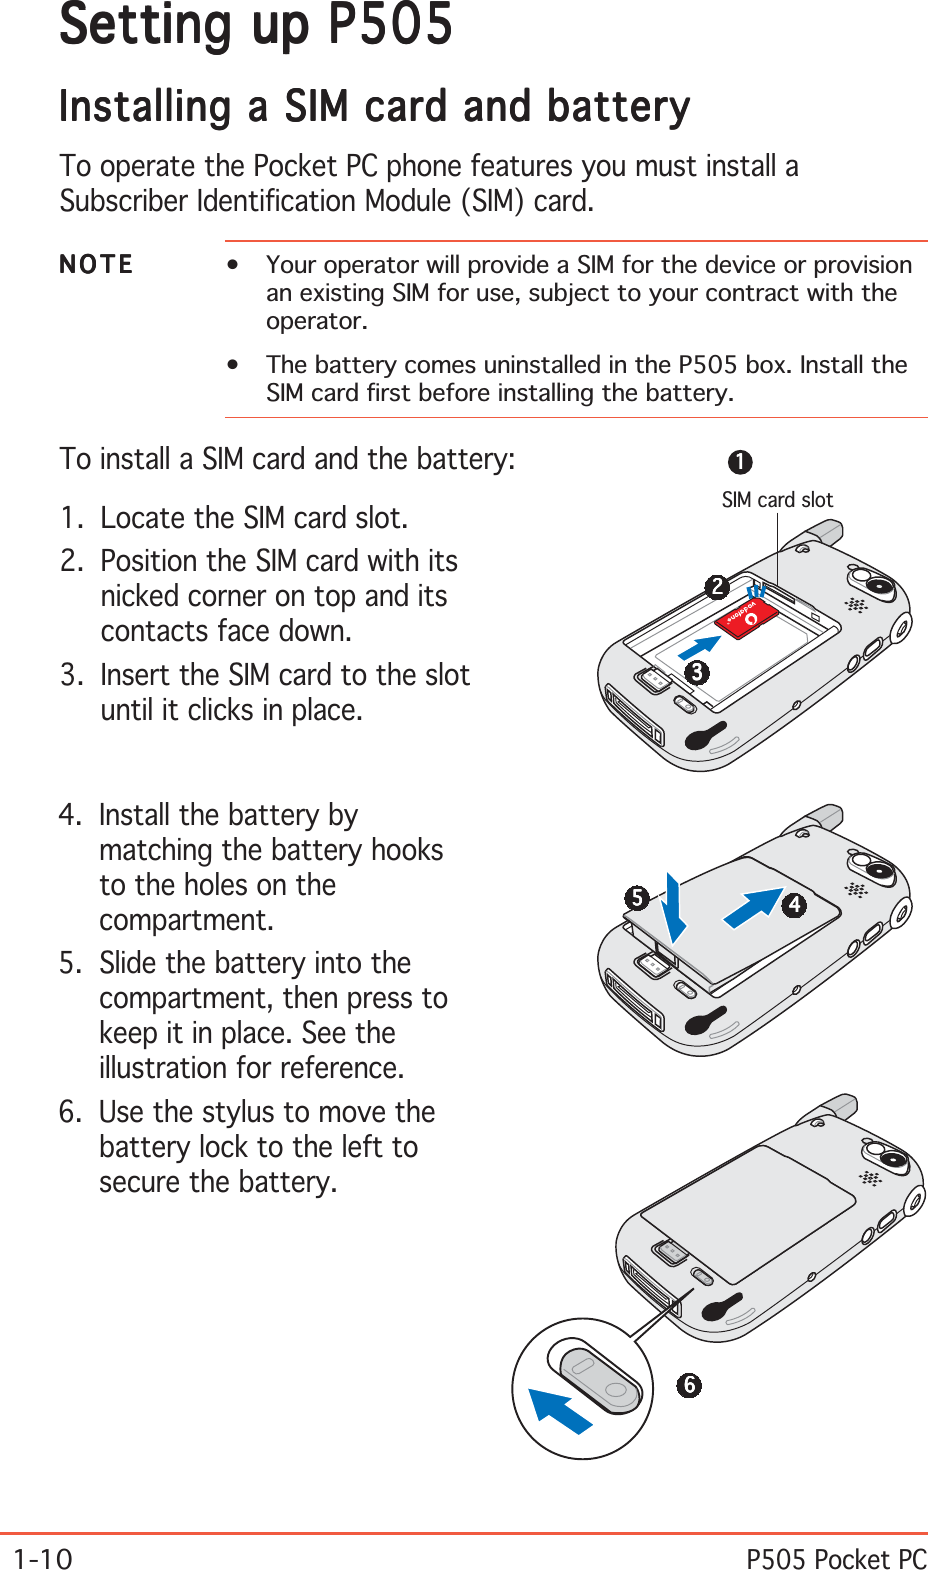 1-10P505 Pocket PCSetting up P505Setting up P505Setting up P505Setting up P505Setting up P505Installing a SIM card and batteryInstalling a SIM card and batteryInstalling a SIM card and batteryInstalling a SIM card and batteryInstalling a SIM card and batteryTo operate the Pocket PC phone features you must install aSubscriber Identification Module (SIM) card.NOTENOTENOTENOTEN O T E • Your operator will provide a SIM for the device or provisionan existing SIM for use, subject to your contract with theoperator.• The battery comes uninstalled in the P505 box. Install theSIM card first before installing the battery.To install a SIM card and the battery:1. Locate the SIM card slot.2. Position the SIM card with itsnicked corner on top and itscontacts face down.3. Insert the SIM card to the slotuntil it clicks in place.4. Install the battery bymatching the battery hooksto the holes on thecompartment.5. Slide the battery into thecompartment, then press tokeep it in place. See theillustration for reference.6. Use the stylus to move thebattery lock to the left tosecure the battery.SIM card slot111112222233333444445555566666